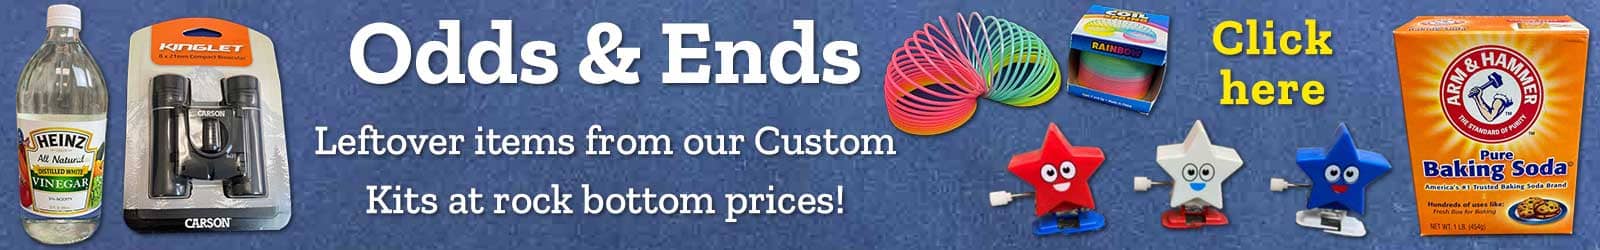 Odds & Ends Leftover items from our Custom Kits at rock bottom prices!